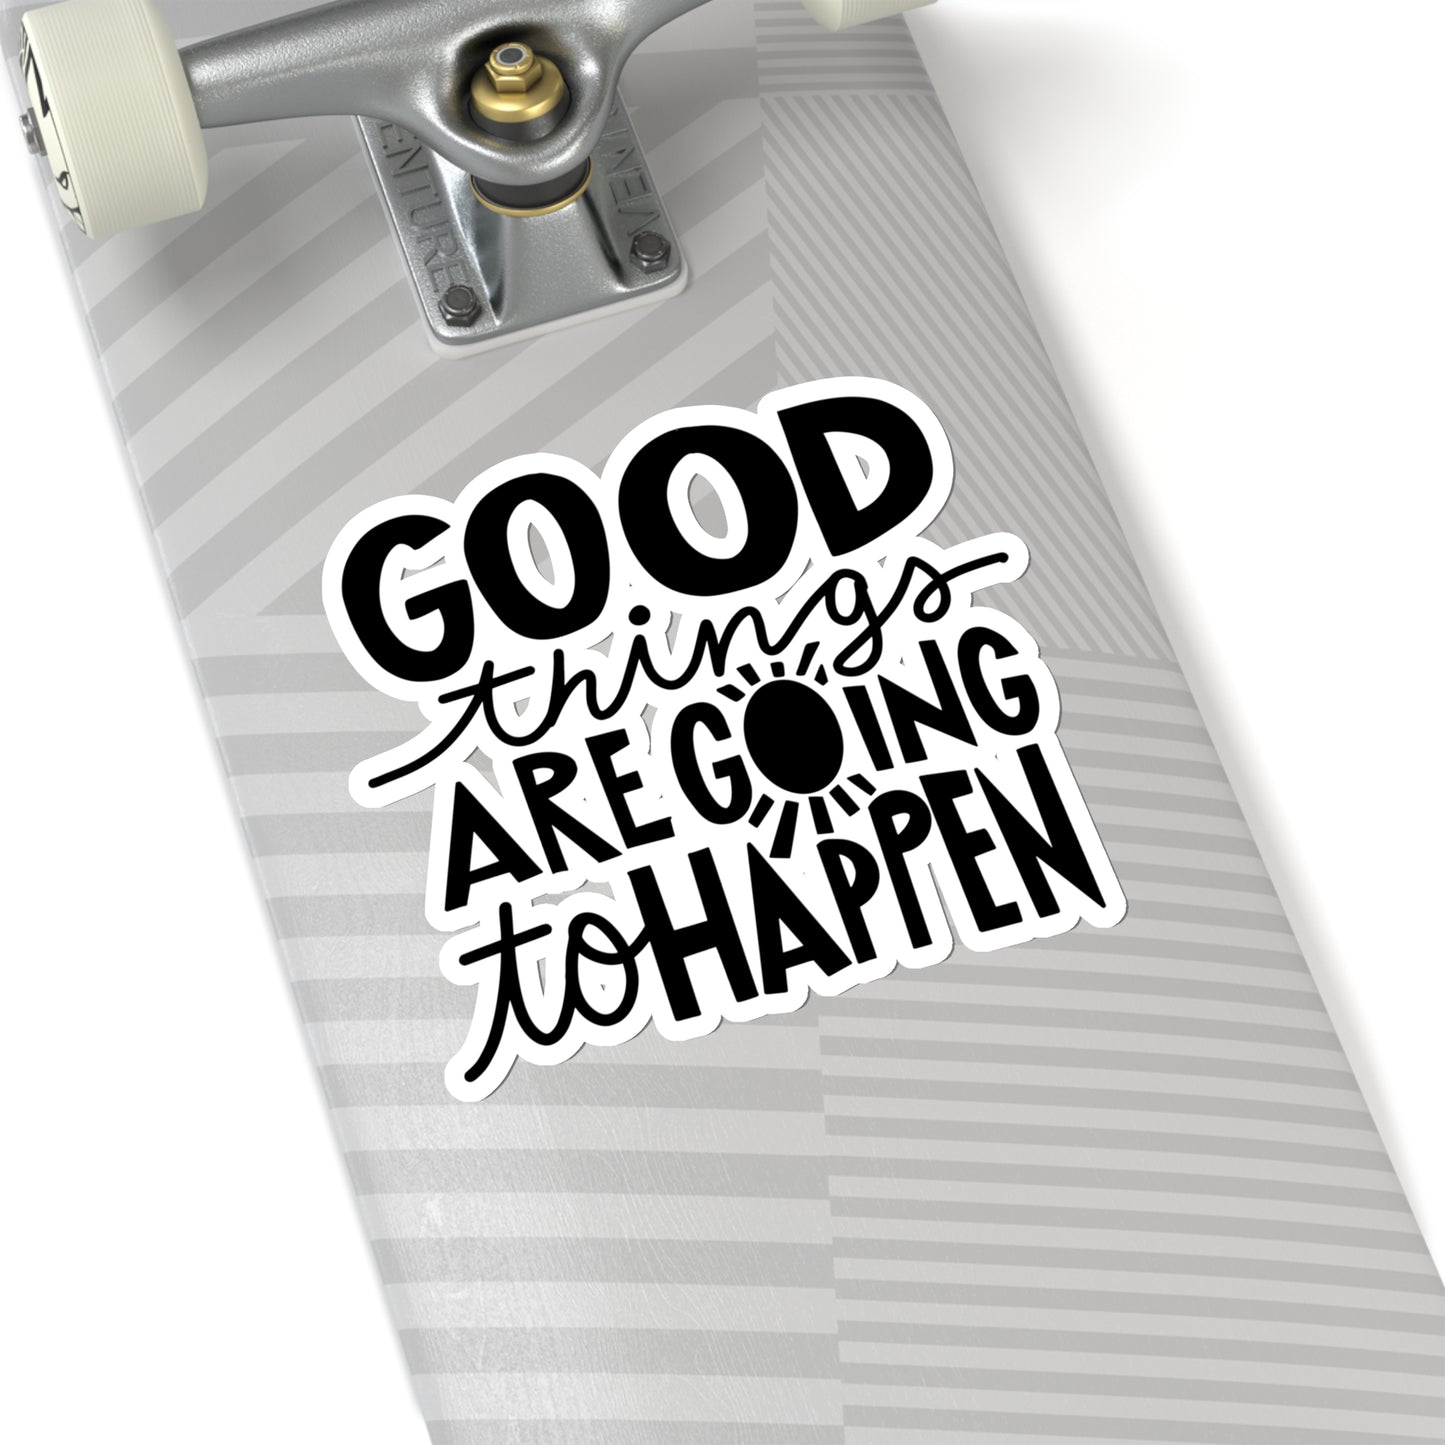 Lovely Die-Cut Inspirational Sticker Uplifting Message Good Things Are Going To Happen TodayMeaningful Message Decal